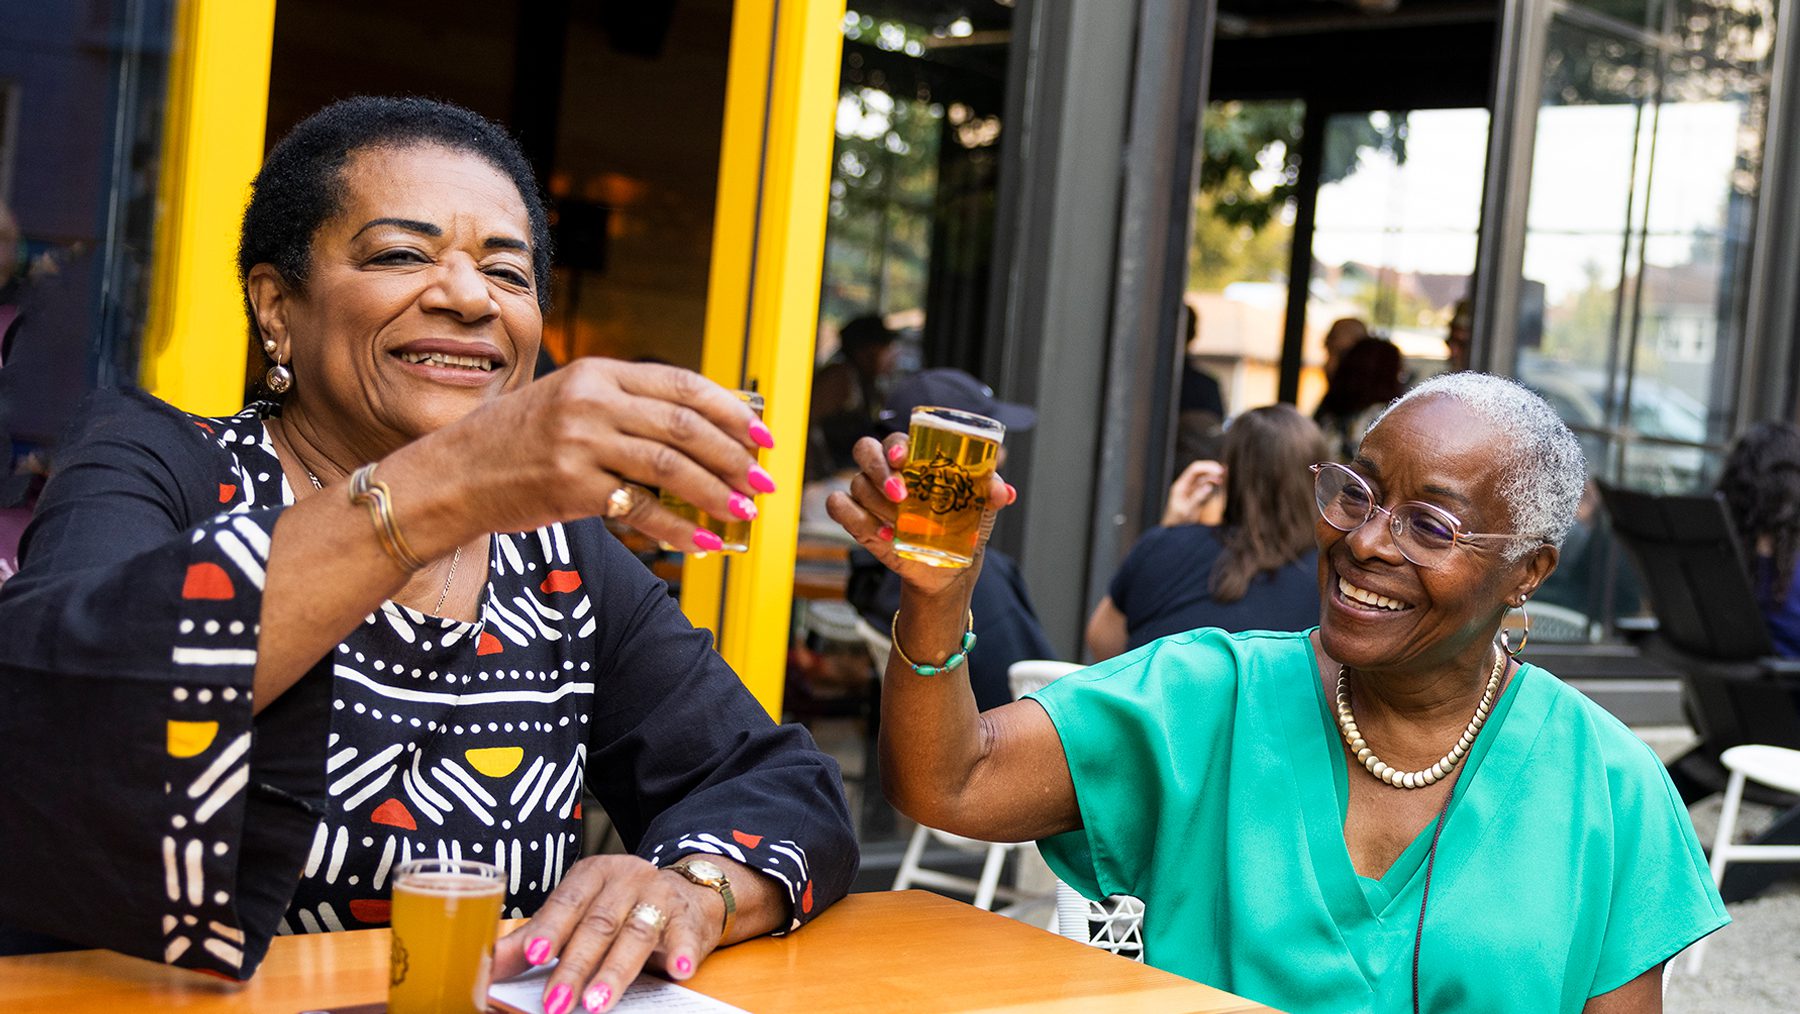 Two women raise small glasses of beer